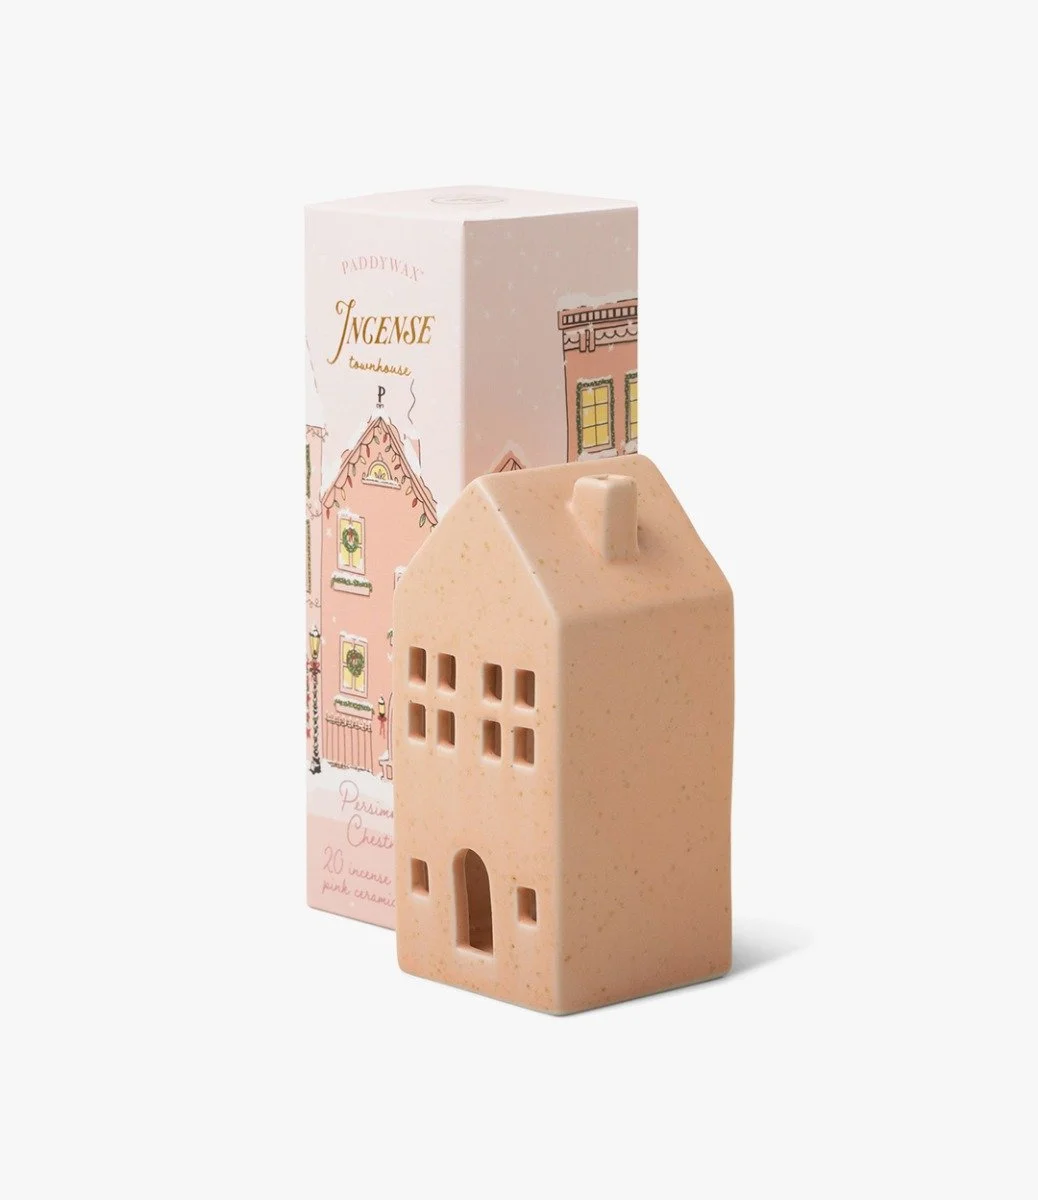 Ceramic Village Incense Holders Pink Townhouse by Paddywax